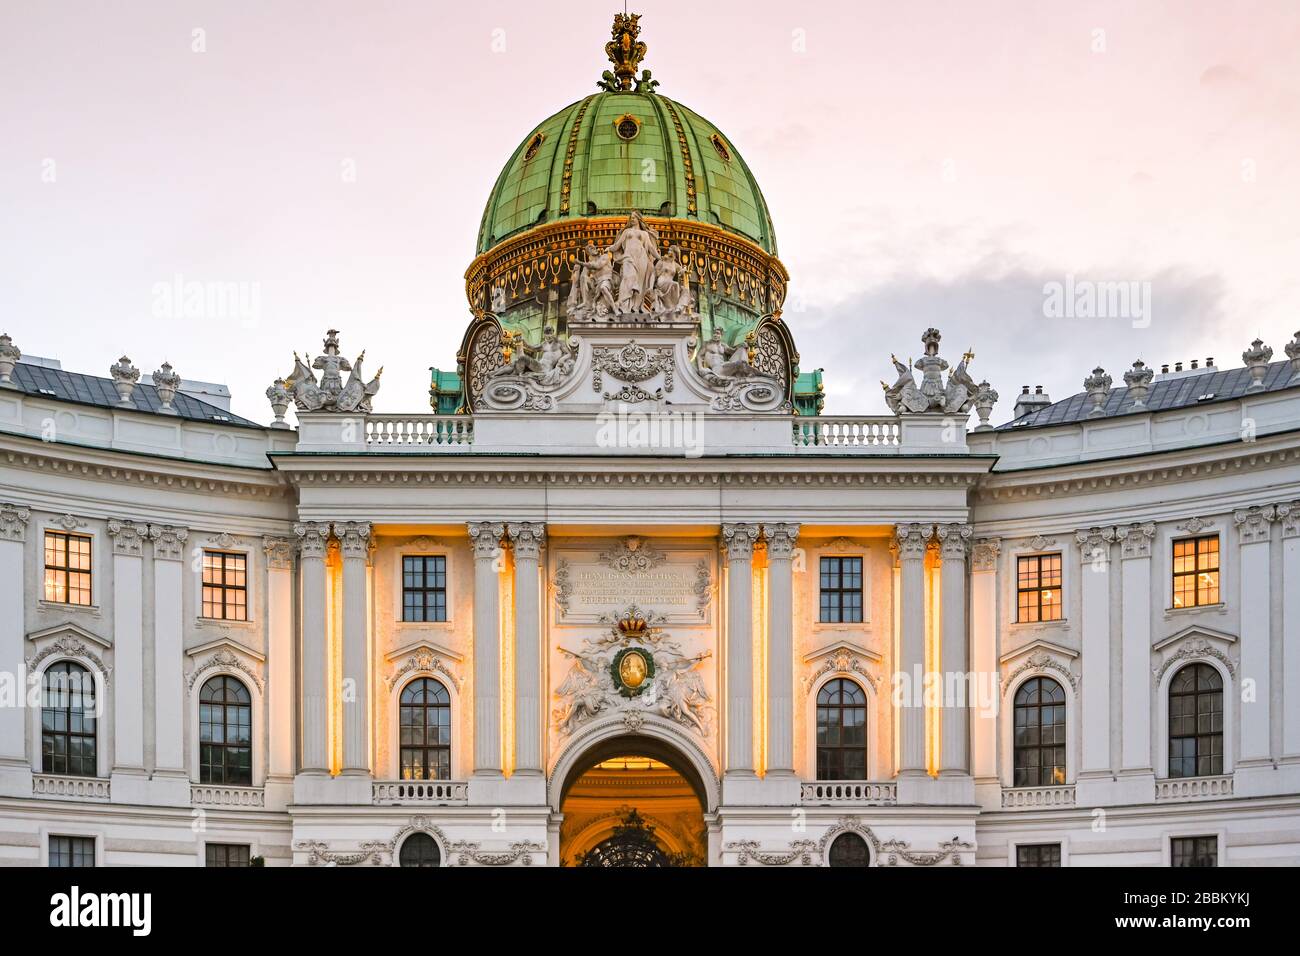 VIENNA, AUSTRIA - NOVEMBER 2019: The exterior of the Hofburg Imperial Palace in Vienna, floodlit at dusk. Stock Photo